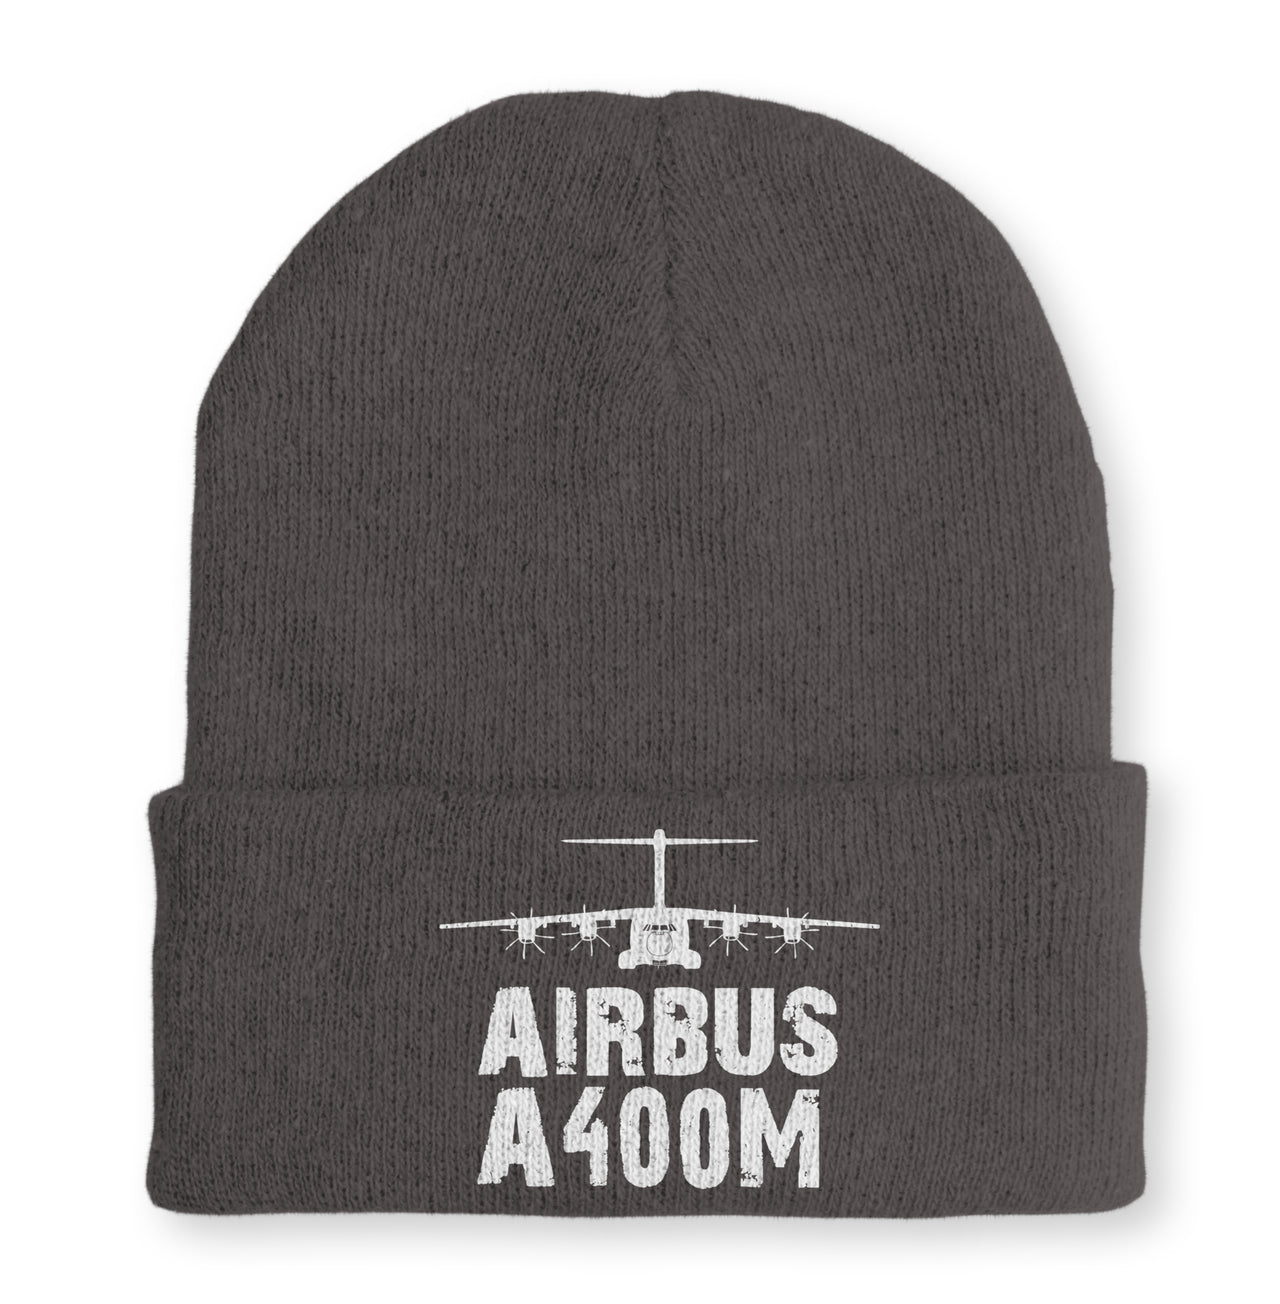 Airbus A400M & Plane Embroidered Beanies